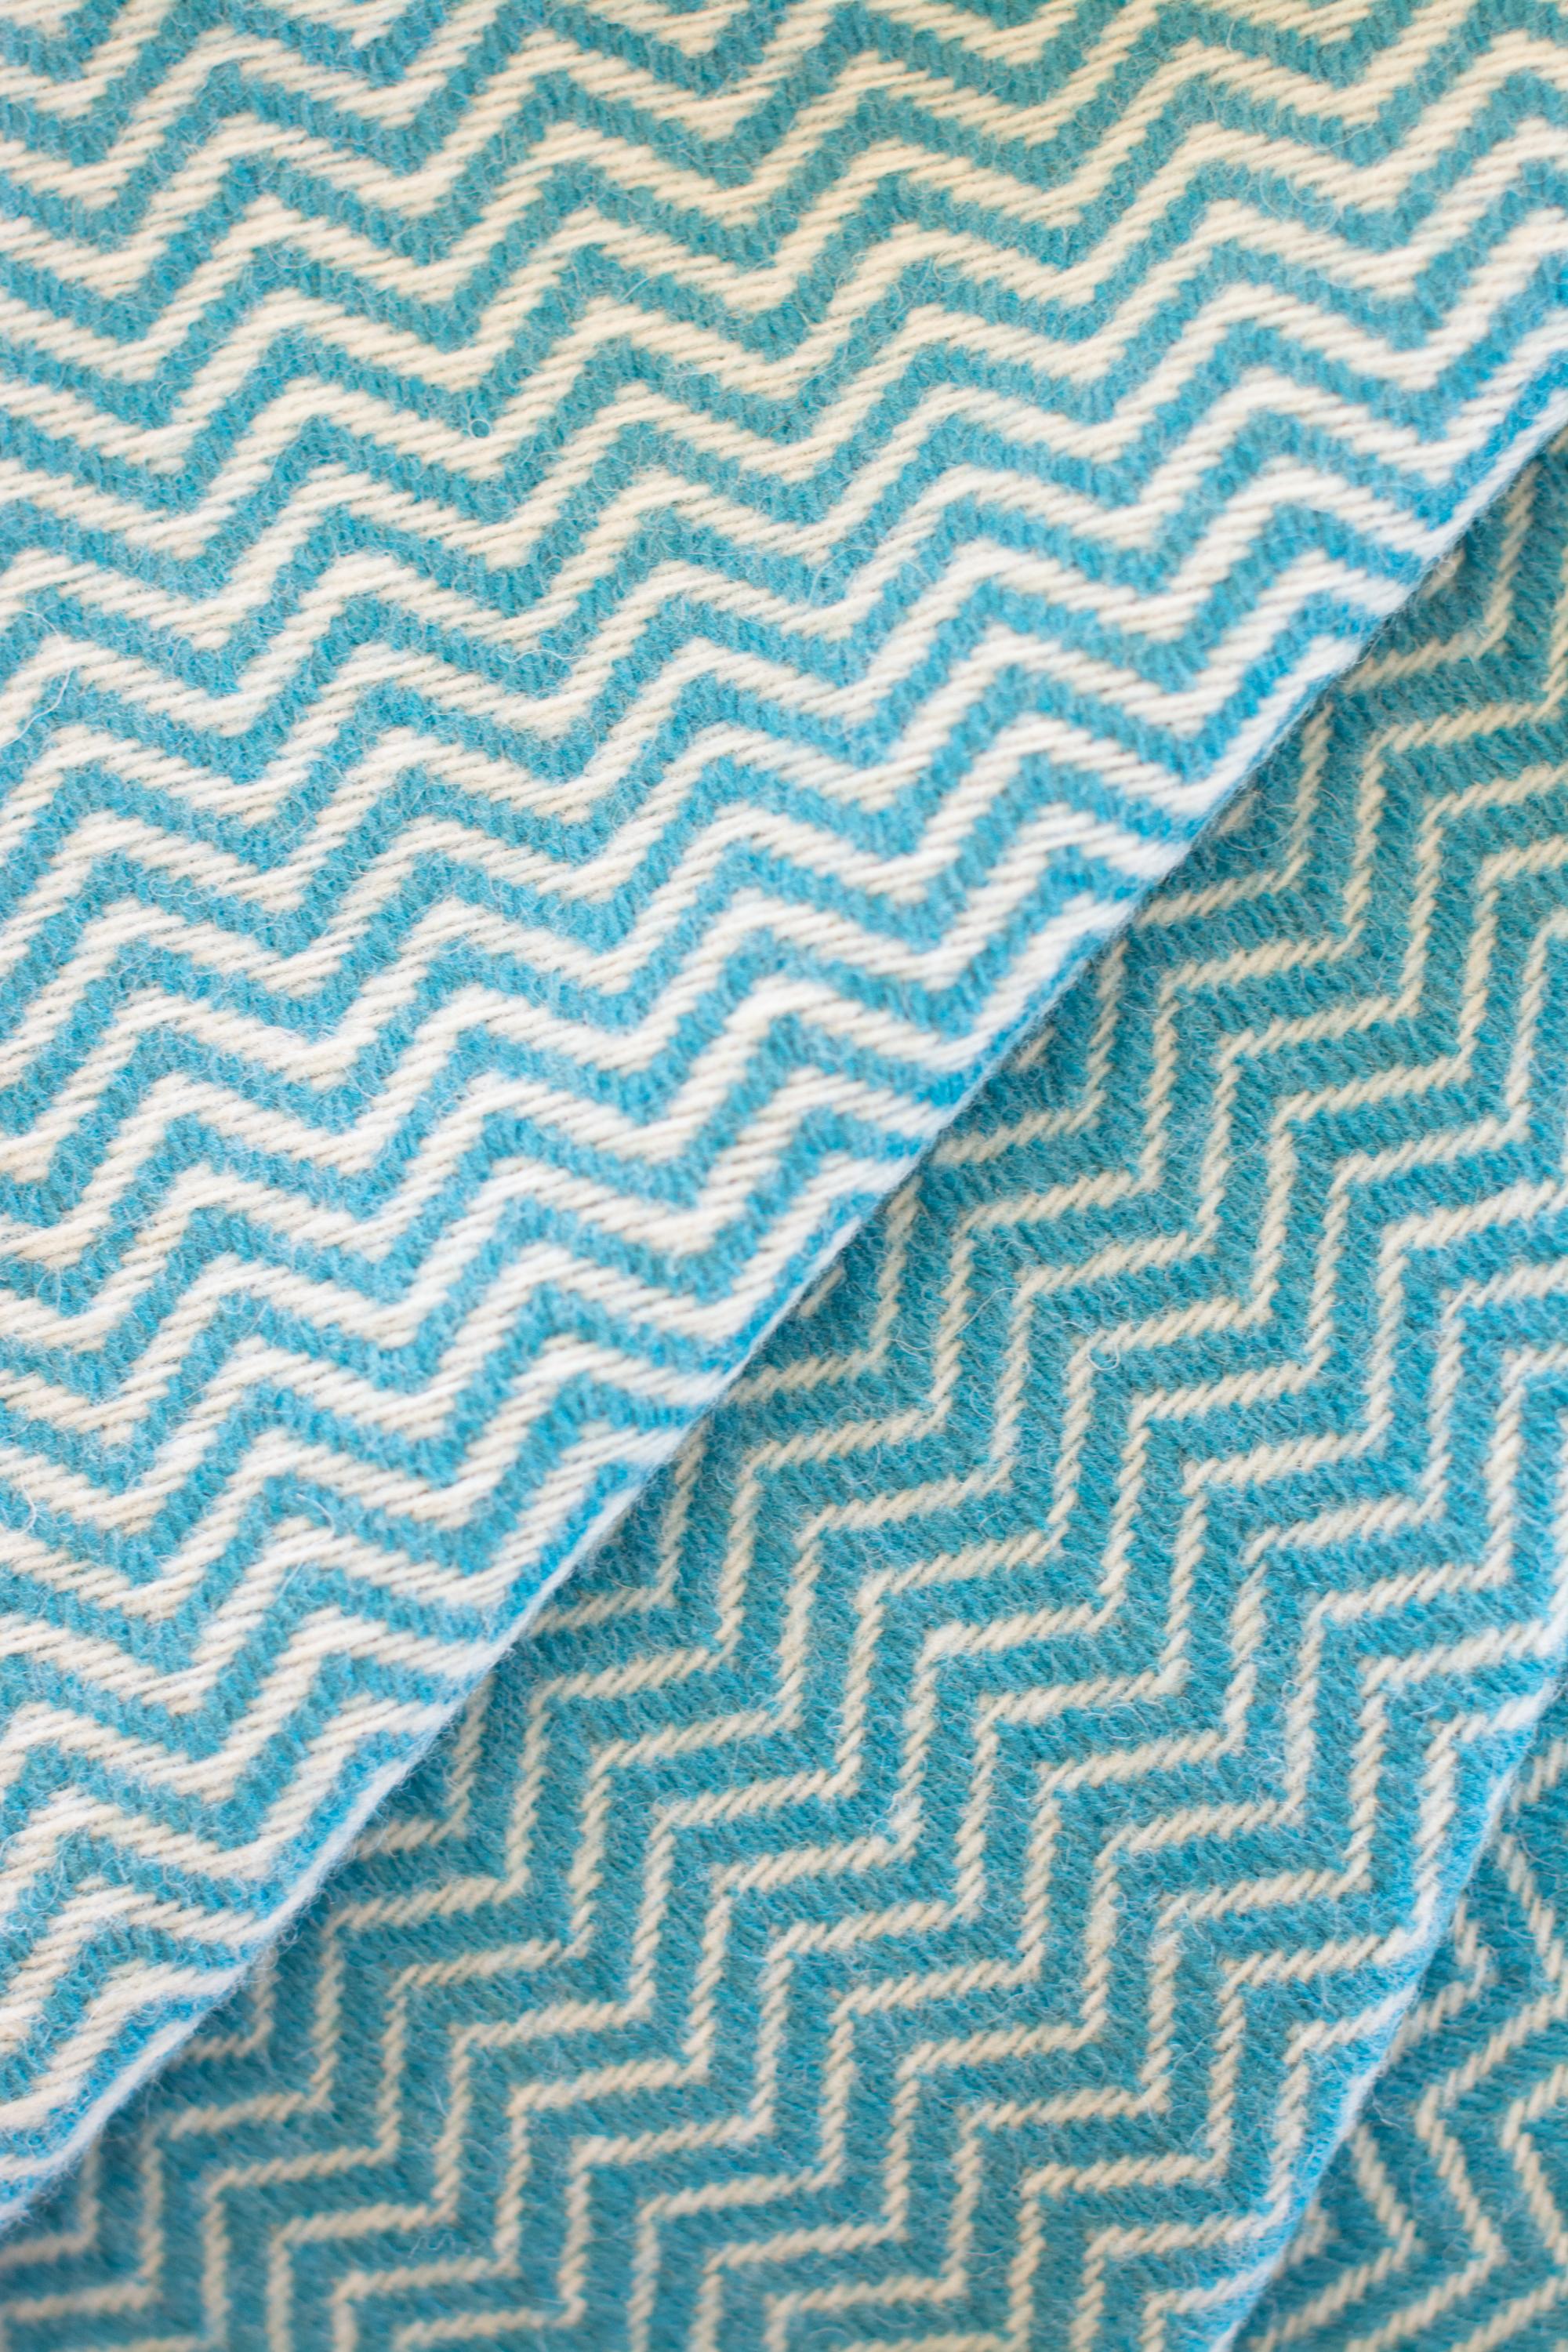 The Otilia Wave pattern blanket/throw has been created by an incredible and unique family owned weaving and textile company in Portugal. This company impressed us so much by their commitment to working with the environment, their dedication to their